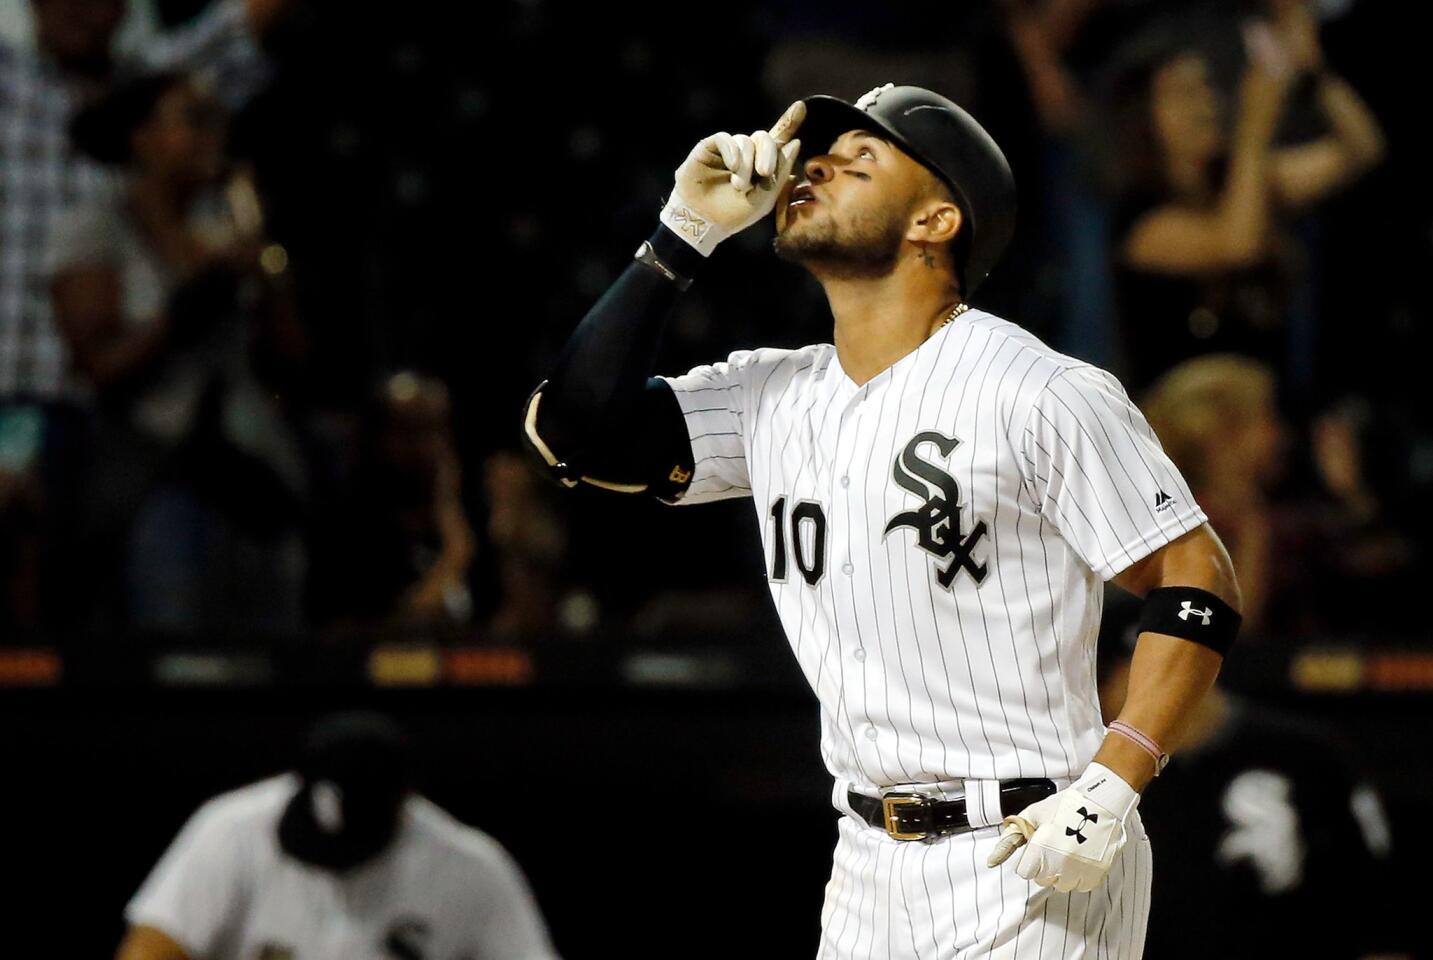 Yoan Moncada reacts after hitting a home run against the Astros during the ninth inning to tie the game at Guaranteed Rate Field on Aug. 10, 2017.